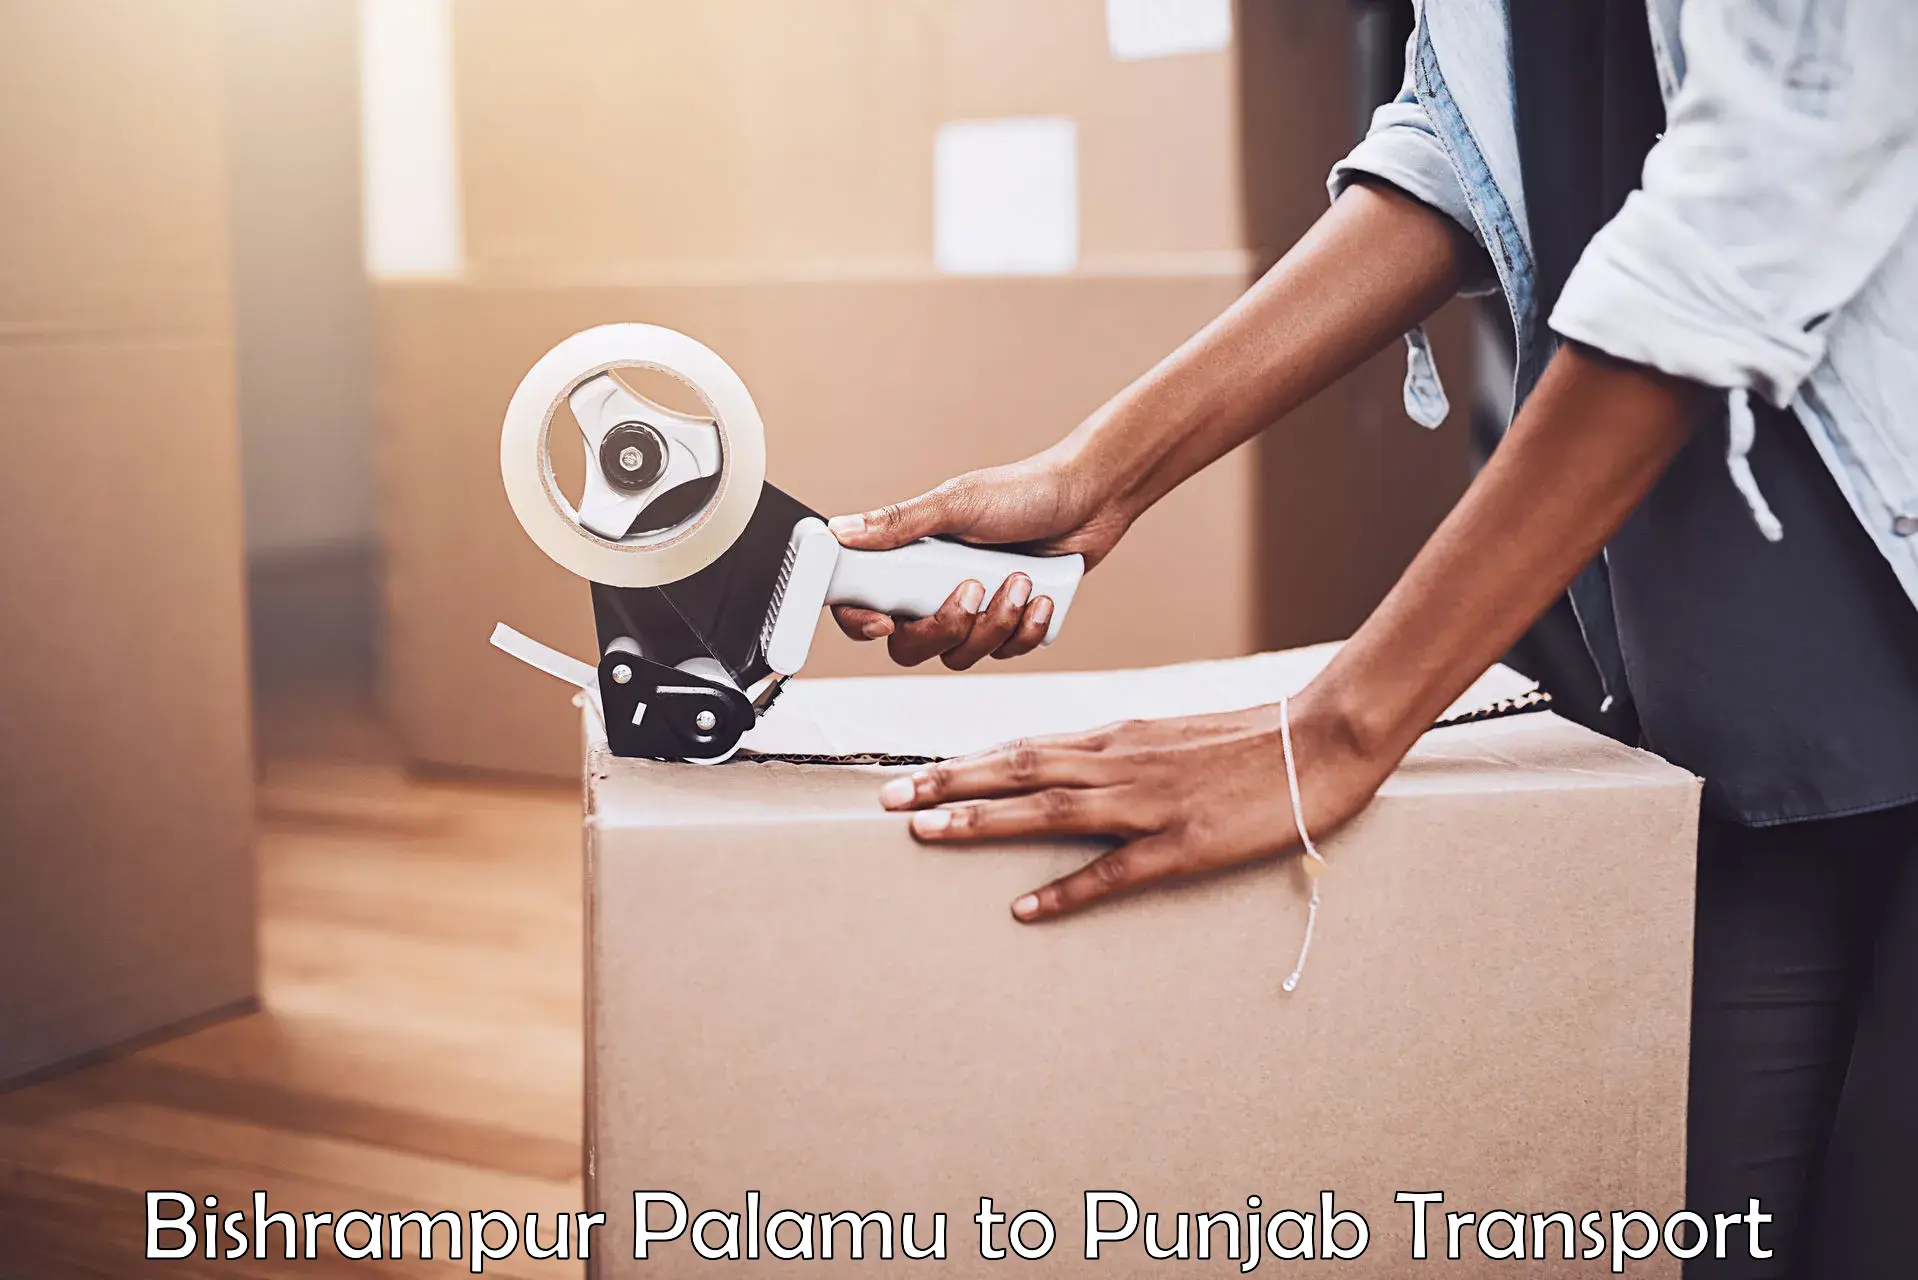 Truck transport companies in India Bishrampur Palamu to Thapar Institute of Engineering and Technology Patiala